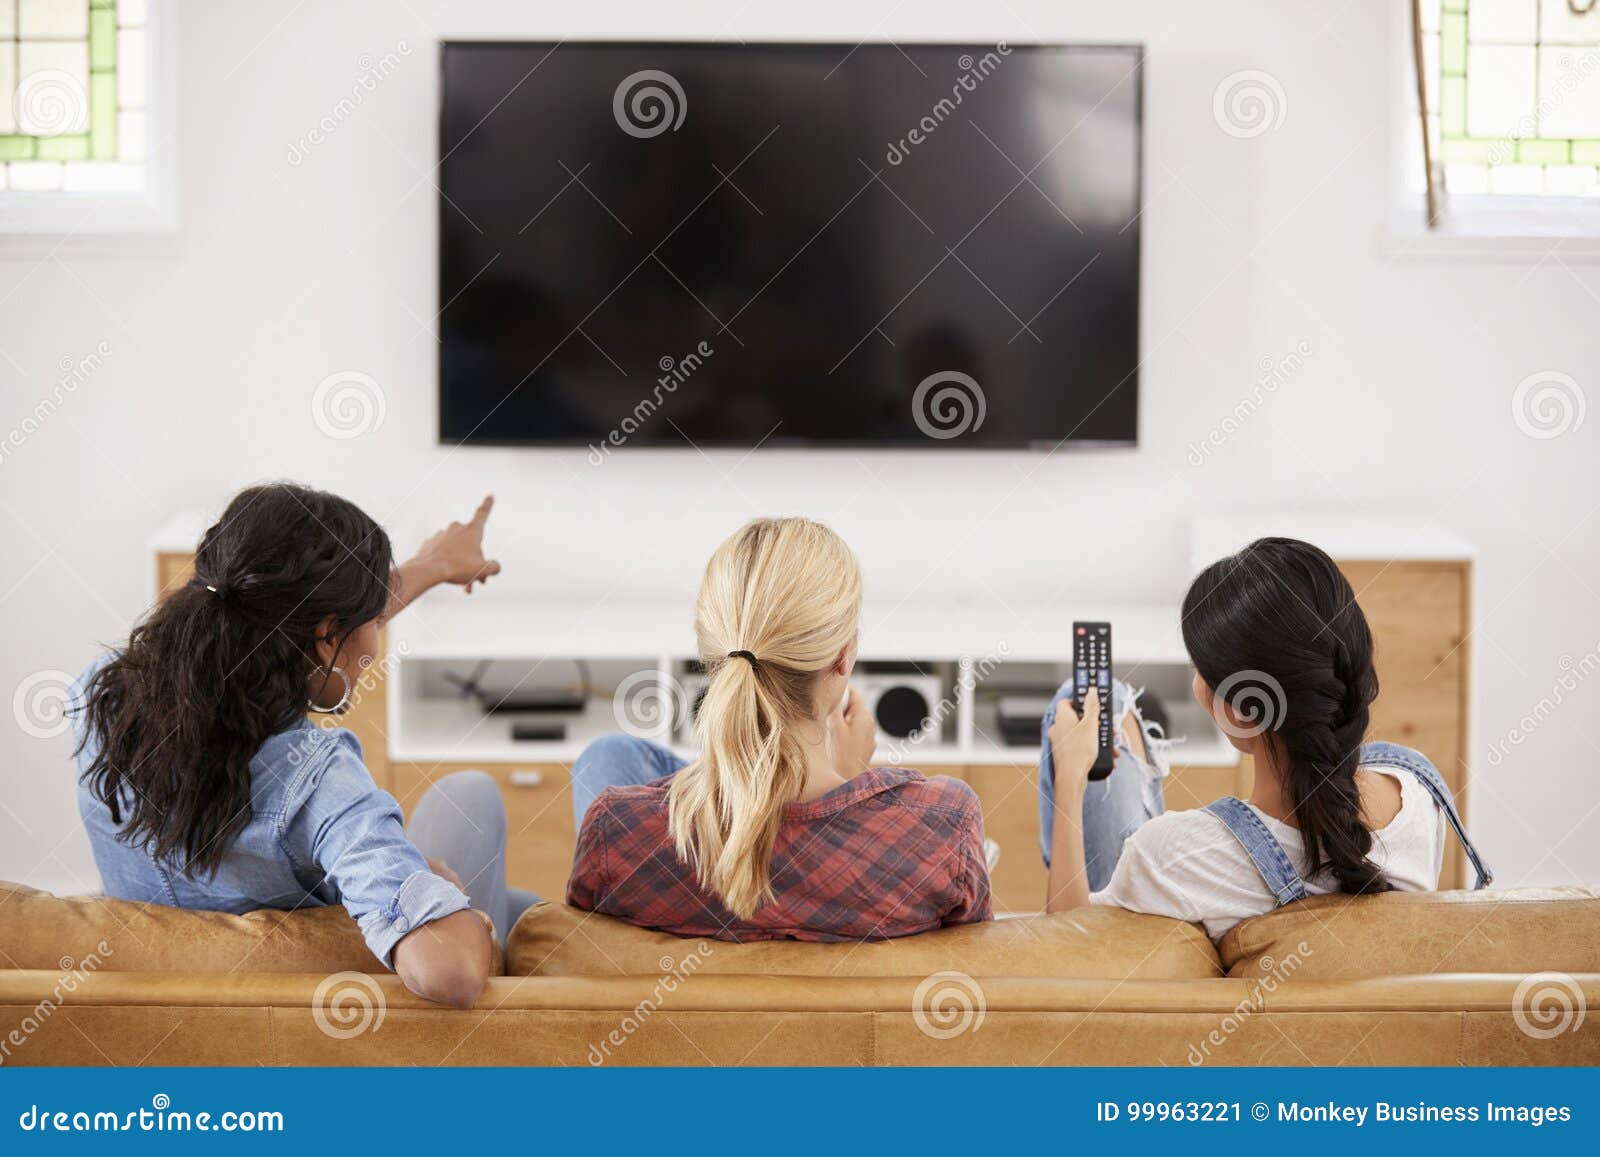 rear view of female friends sitting on sofa watching television